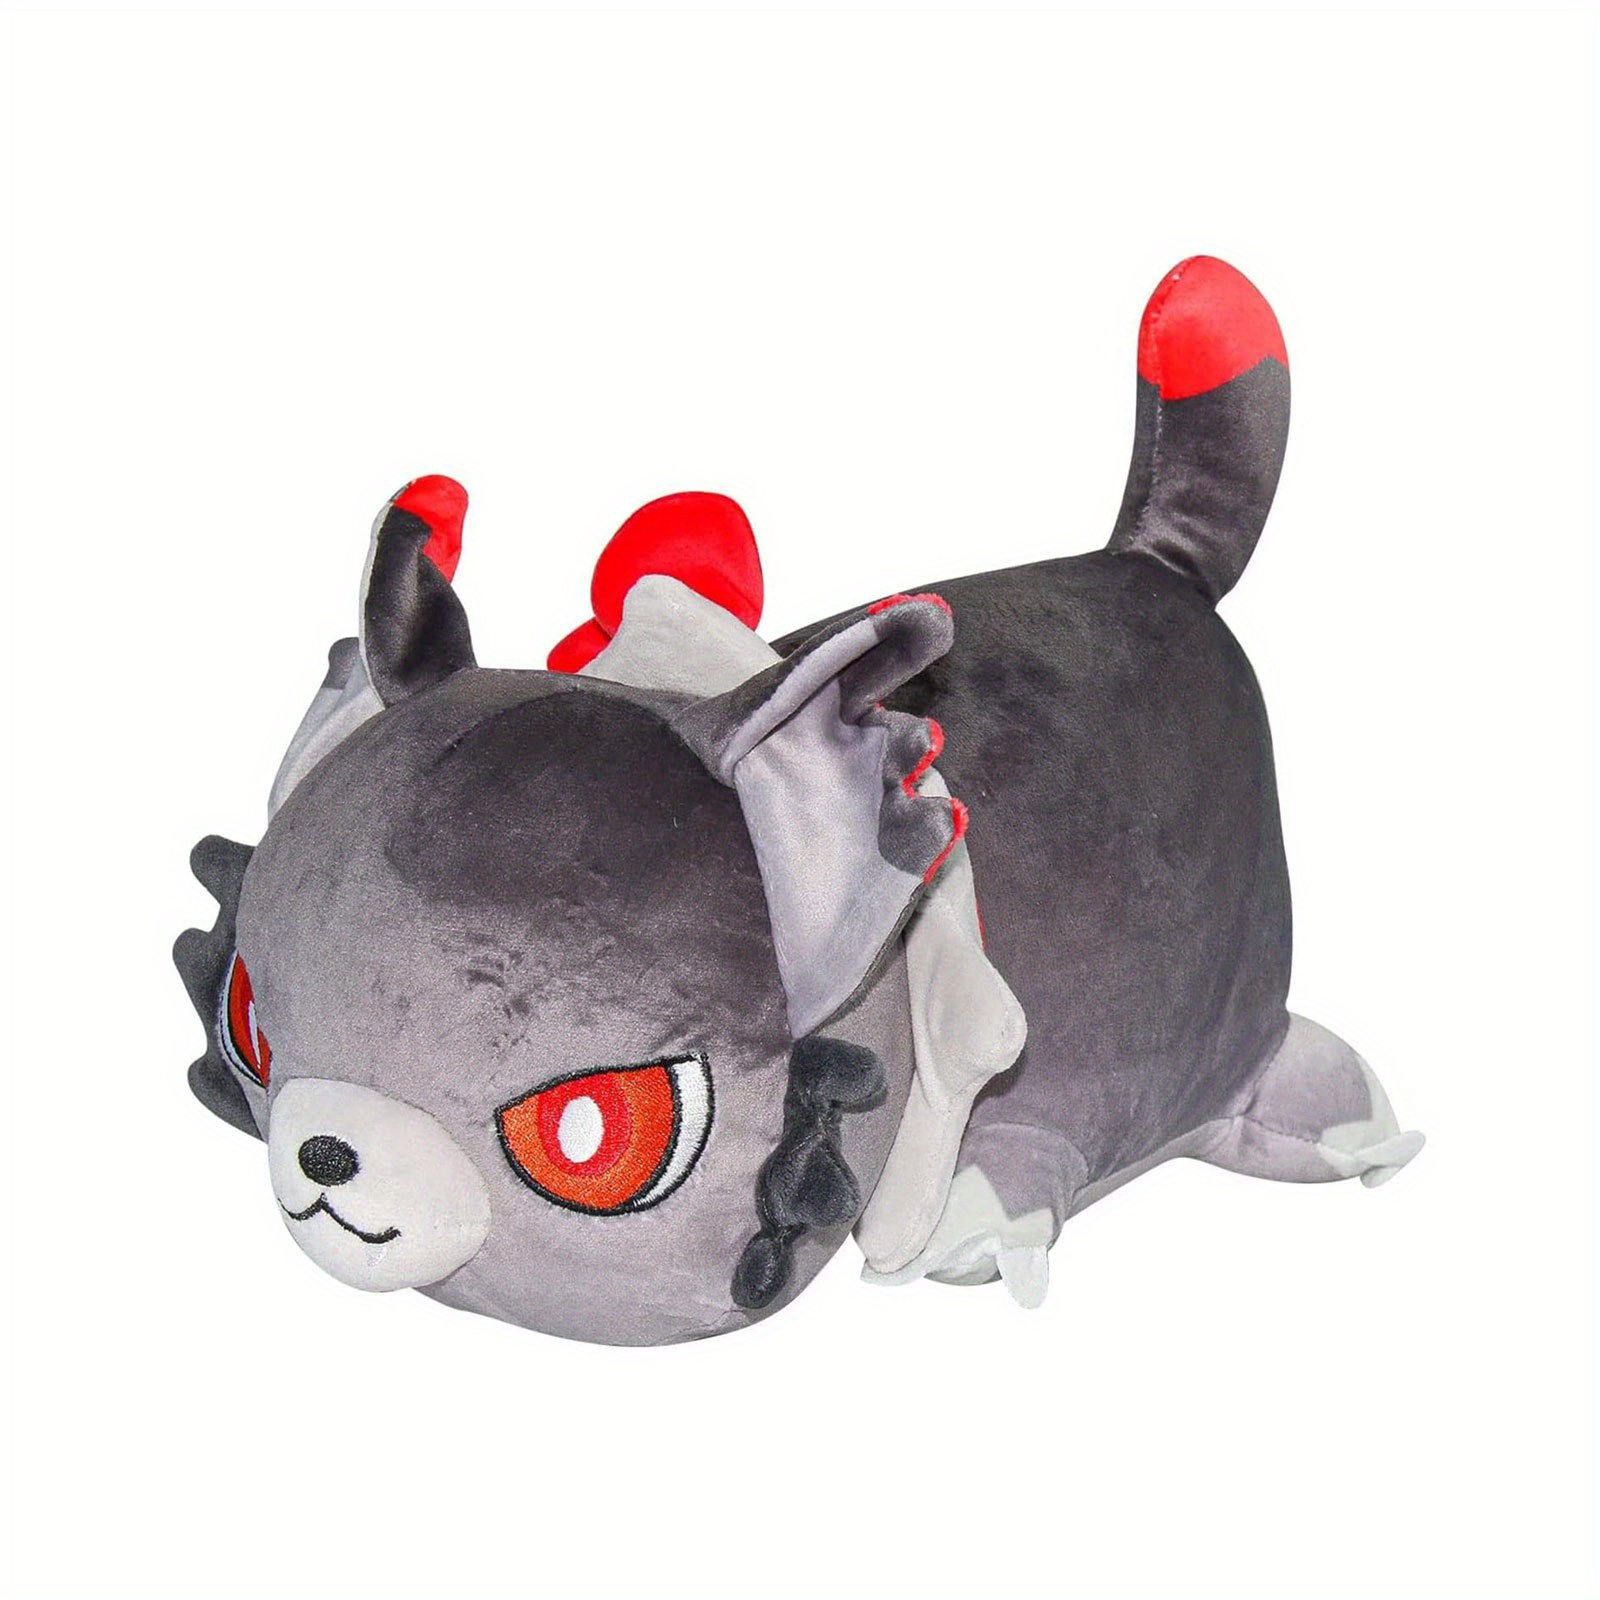 Meemeow Chocolate Cake Cat Plush Meemeows Cat Collection Gift For Fans ...